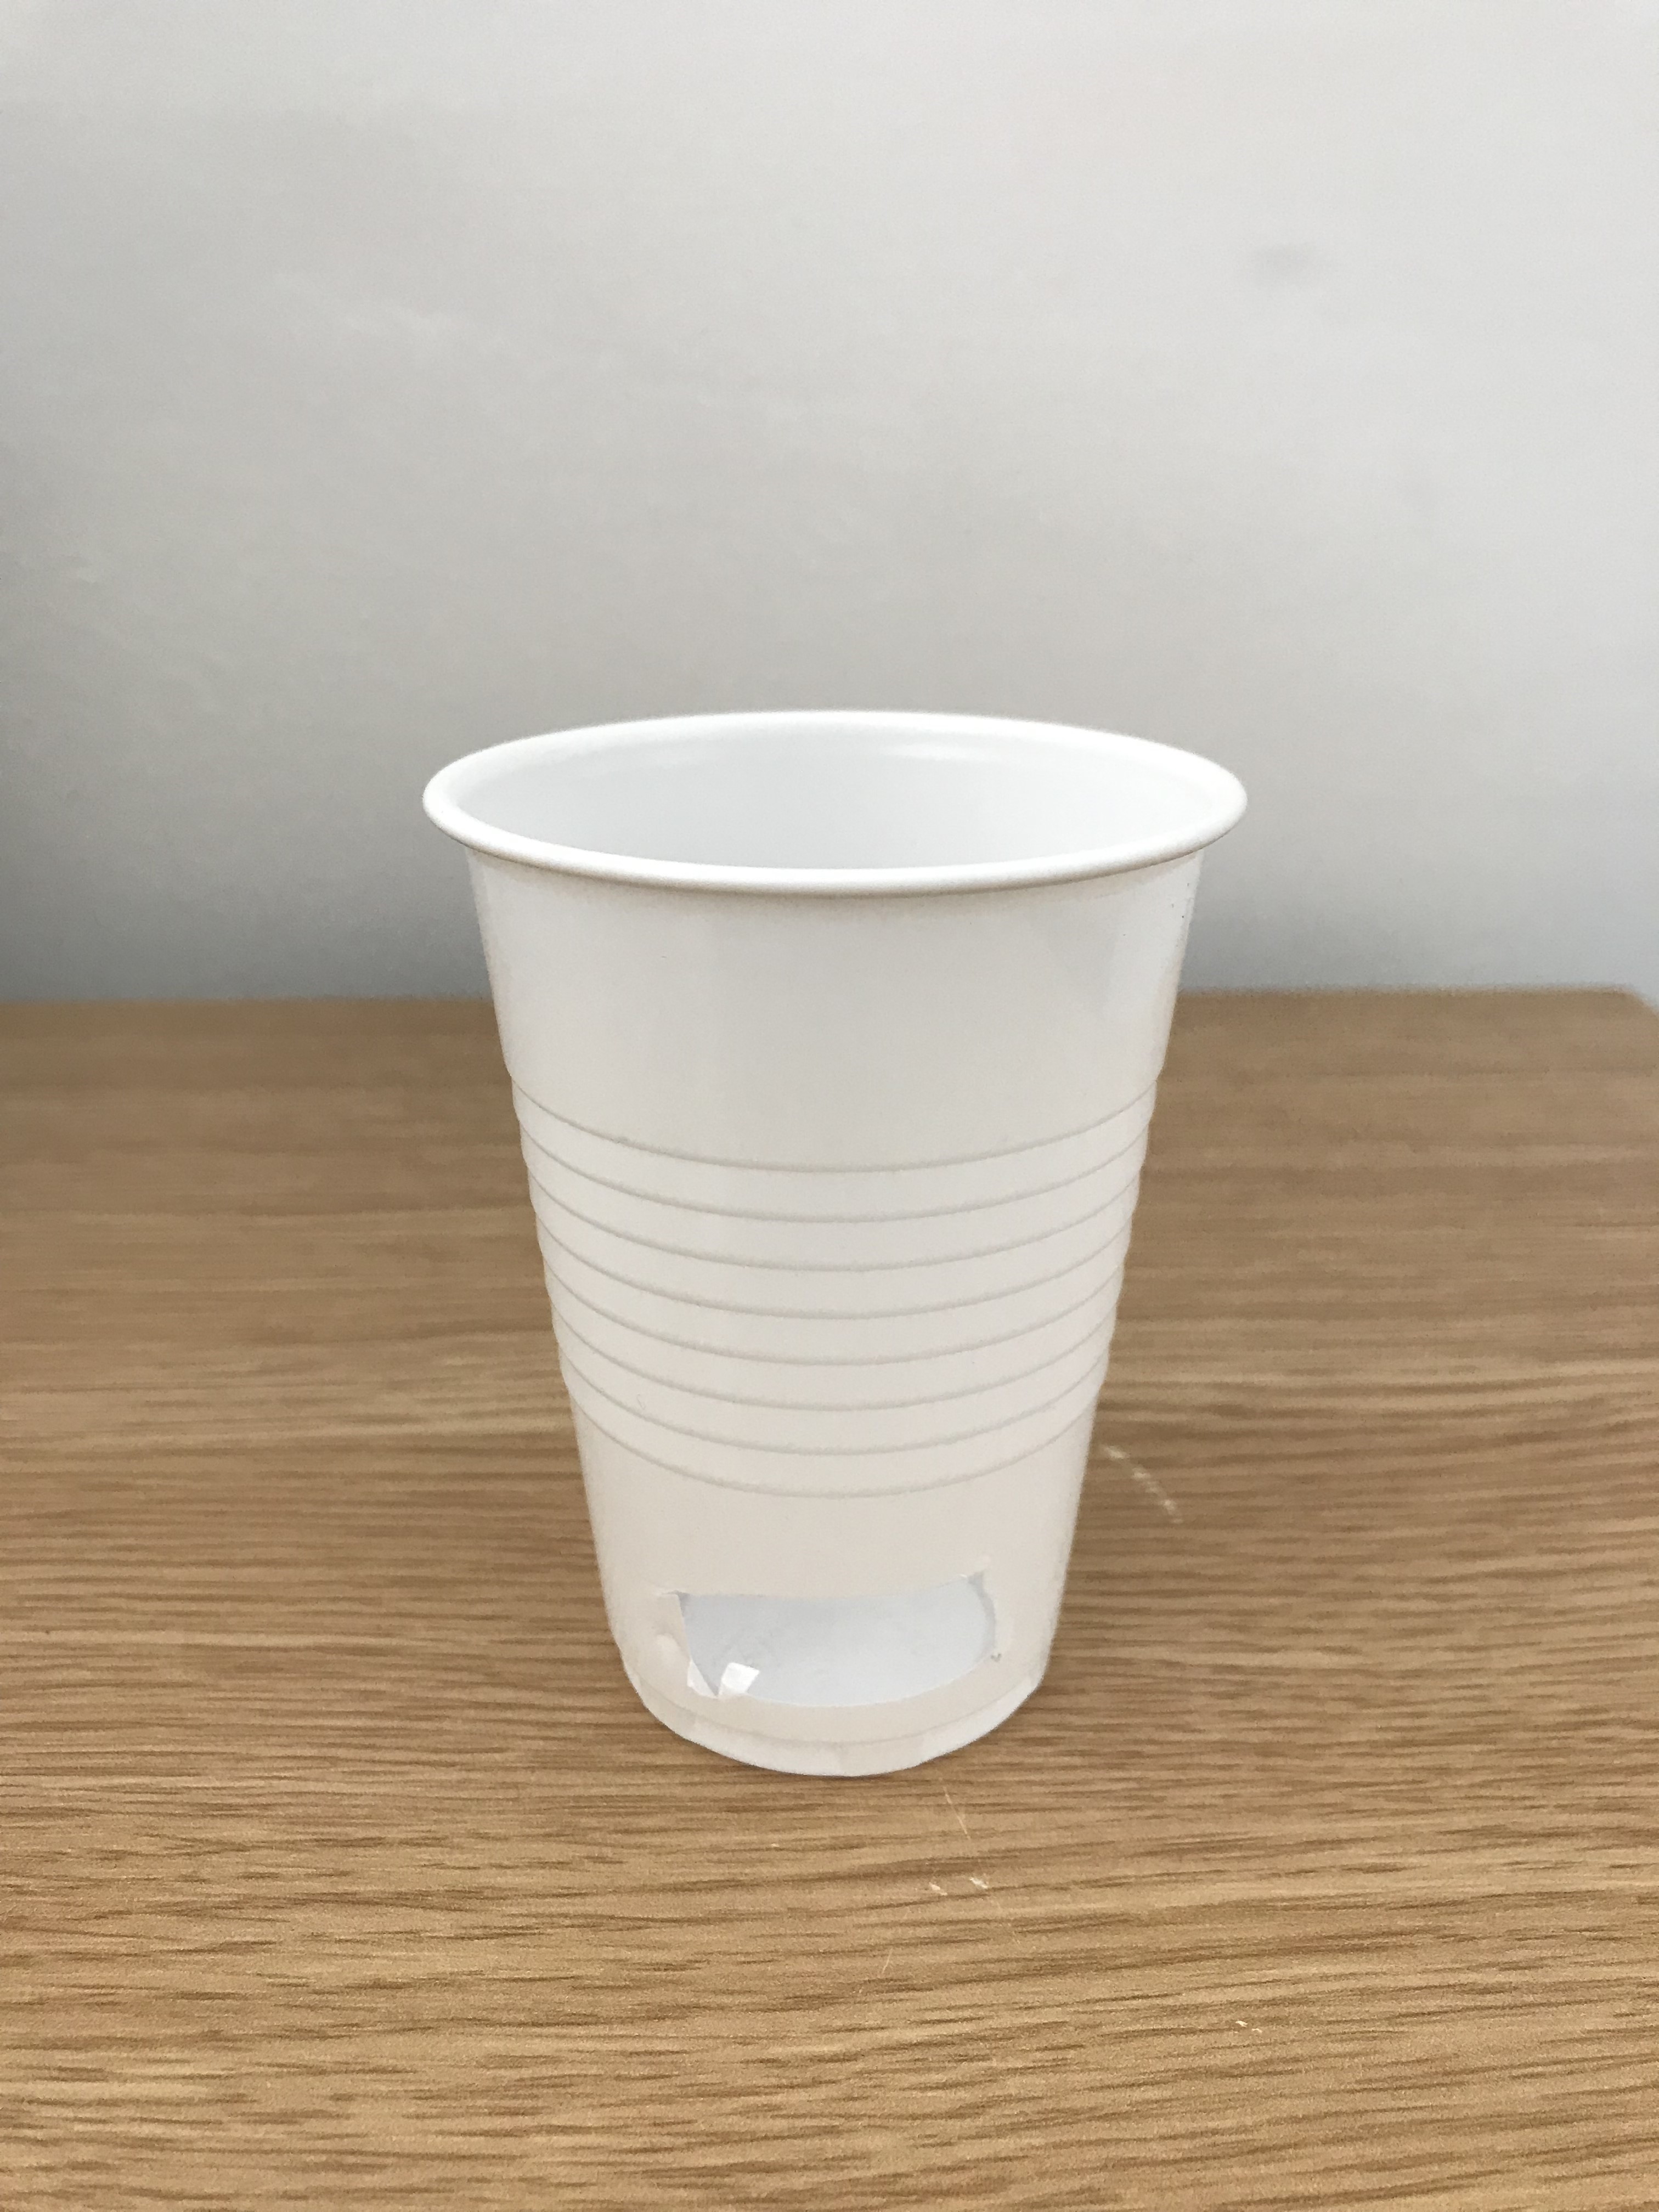 A plastic cup with part of the bottom removed